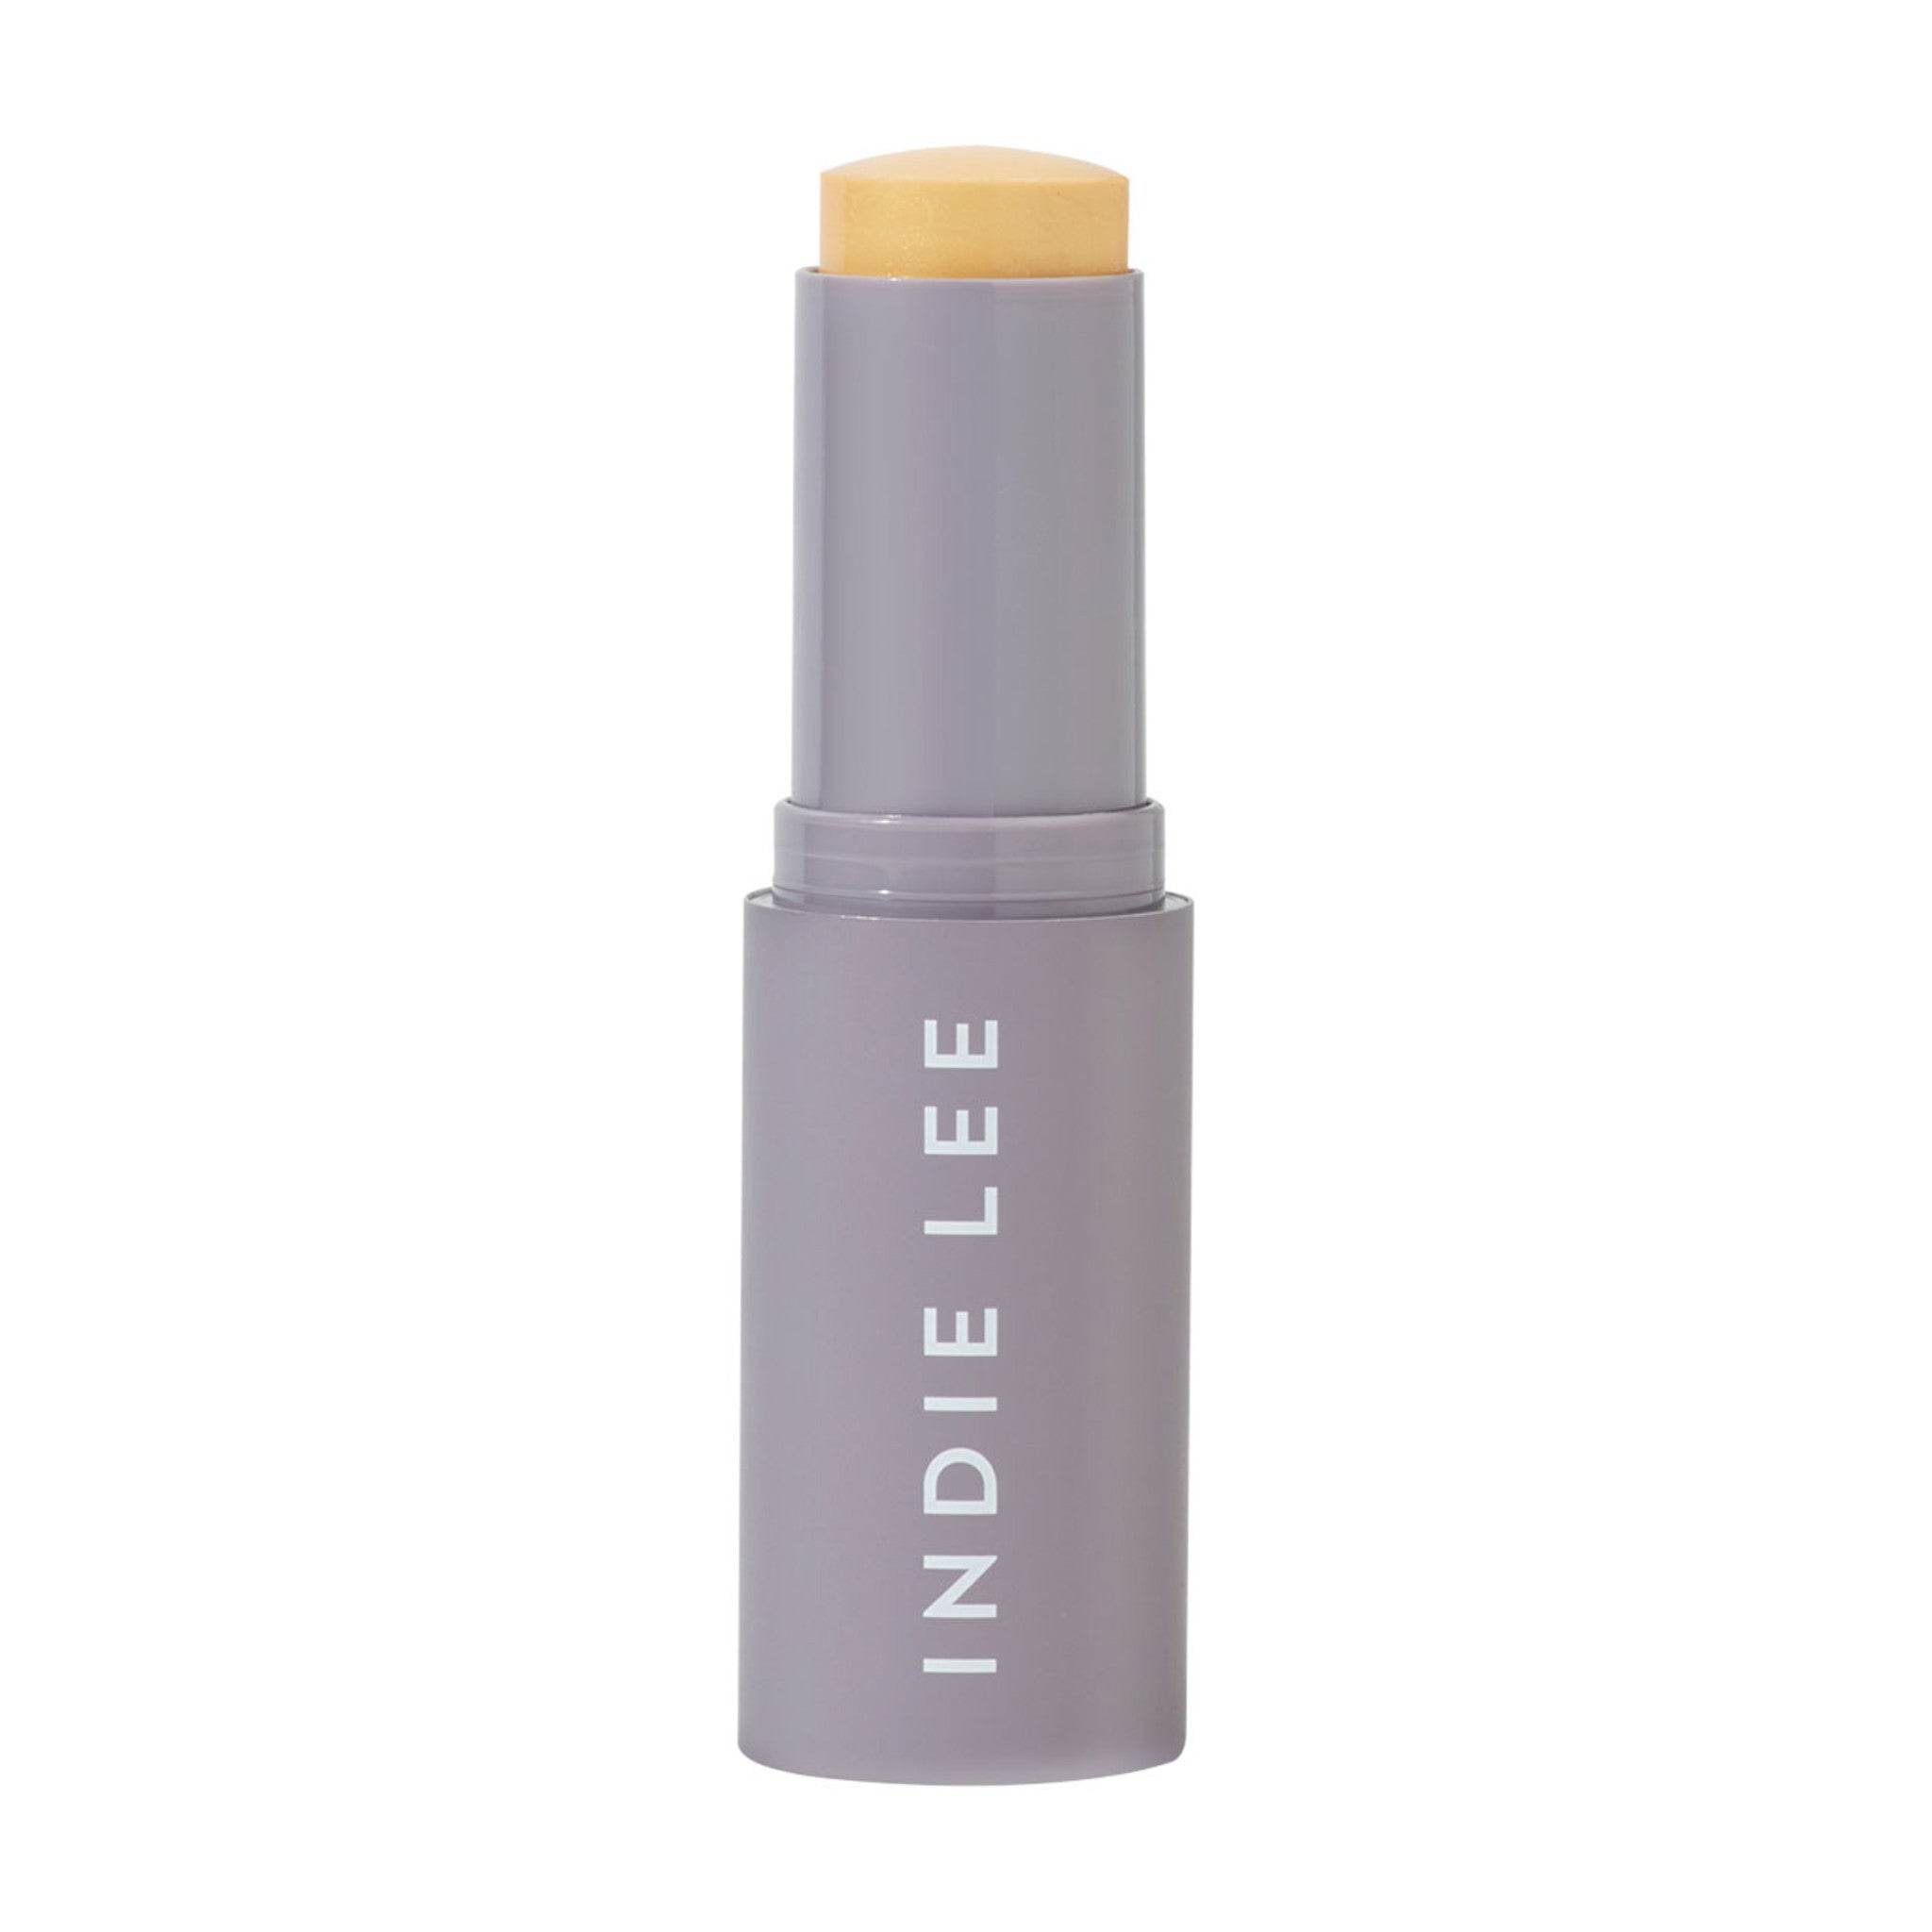 Indie Lee Hydrastick main image. This product is for light and medium and deep complexions